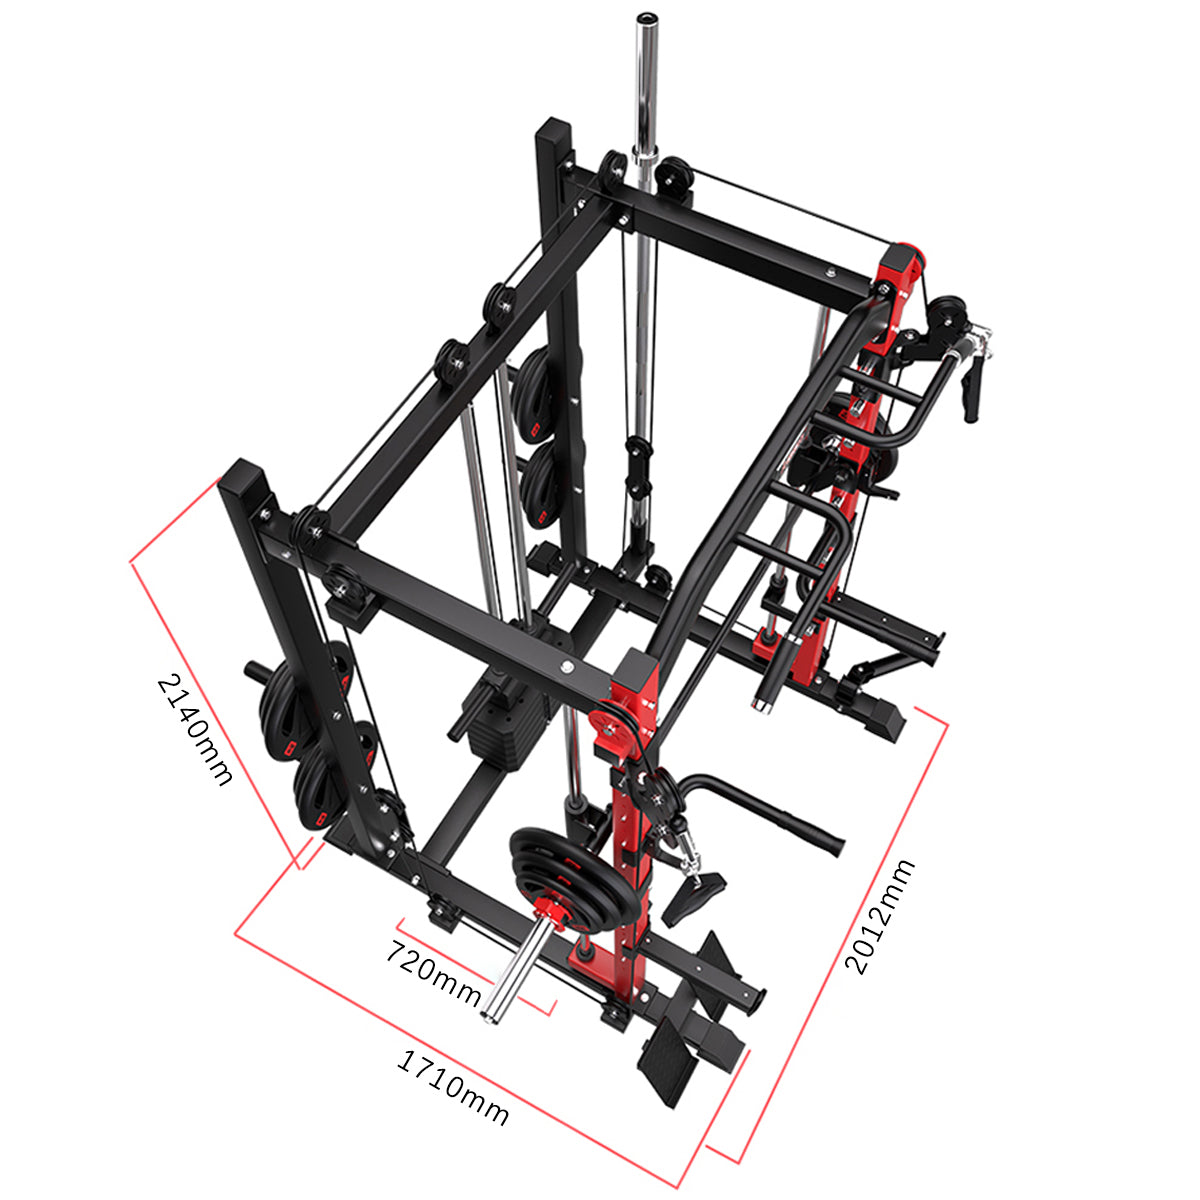 Smith Machine SP024 Top View Dimensions